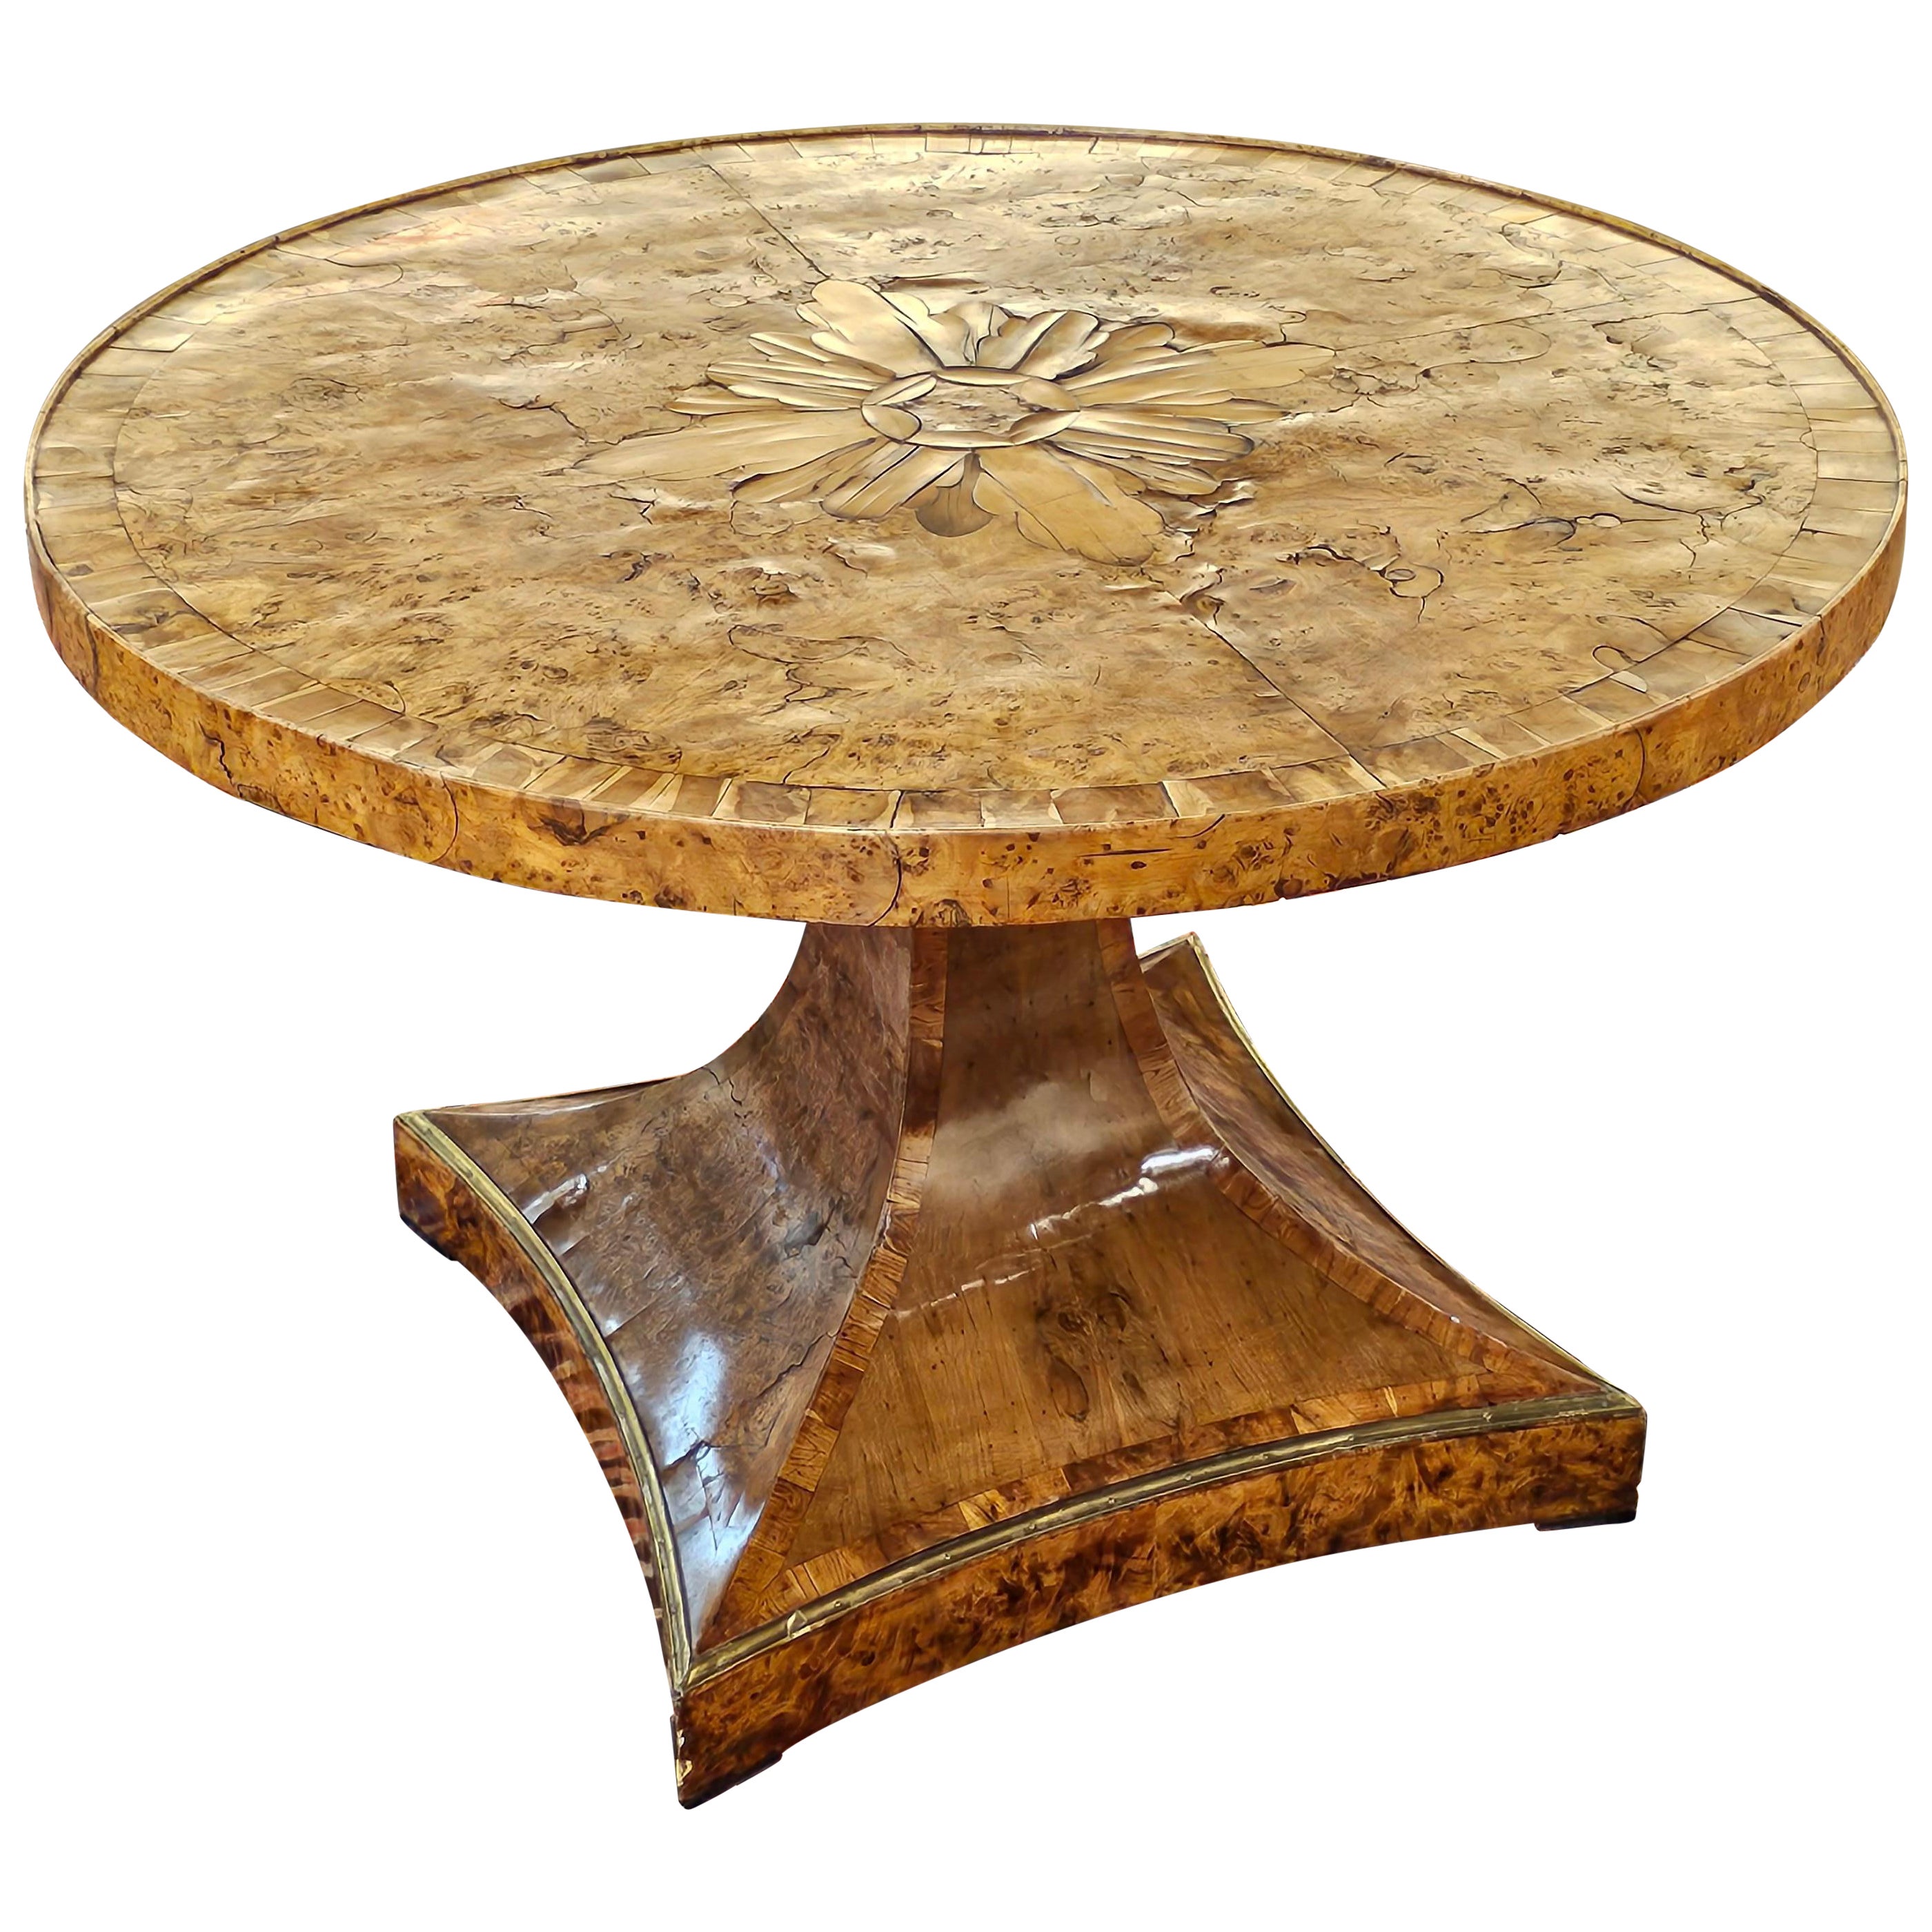 1820s Biedermeier Brass Mounted Carelian Birch and Marquetry Center Table For Sale